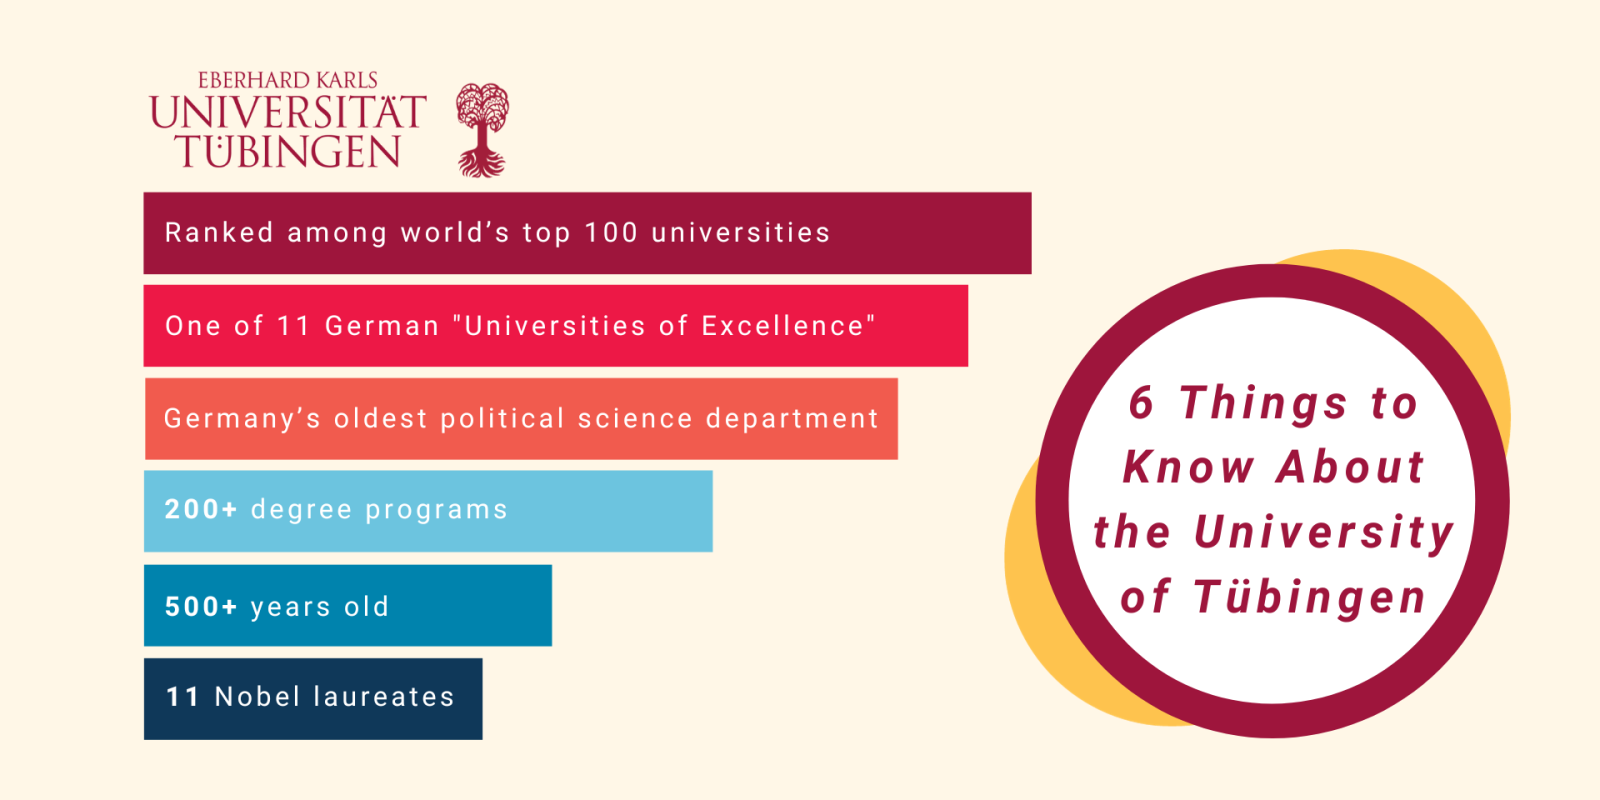 Graphic reads: 6 Things to Know About the University of Tubingen, Ranked among the world's top 100 universities, Oldest and pioneering political science department in Germany, One of 11 German "Universities of Excellence", 500+ years old, 200+ academic programs, 11 Nobel laureates